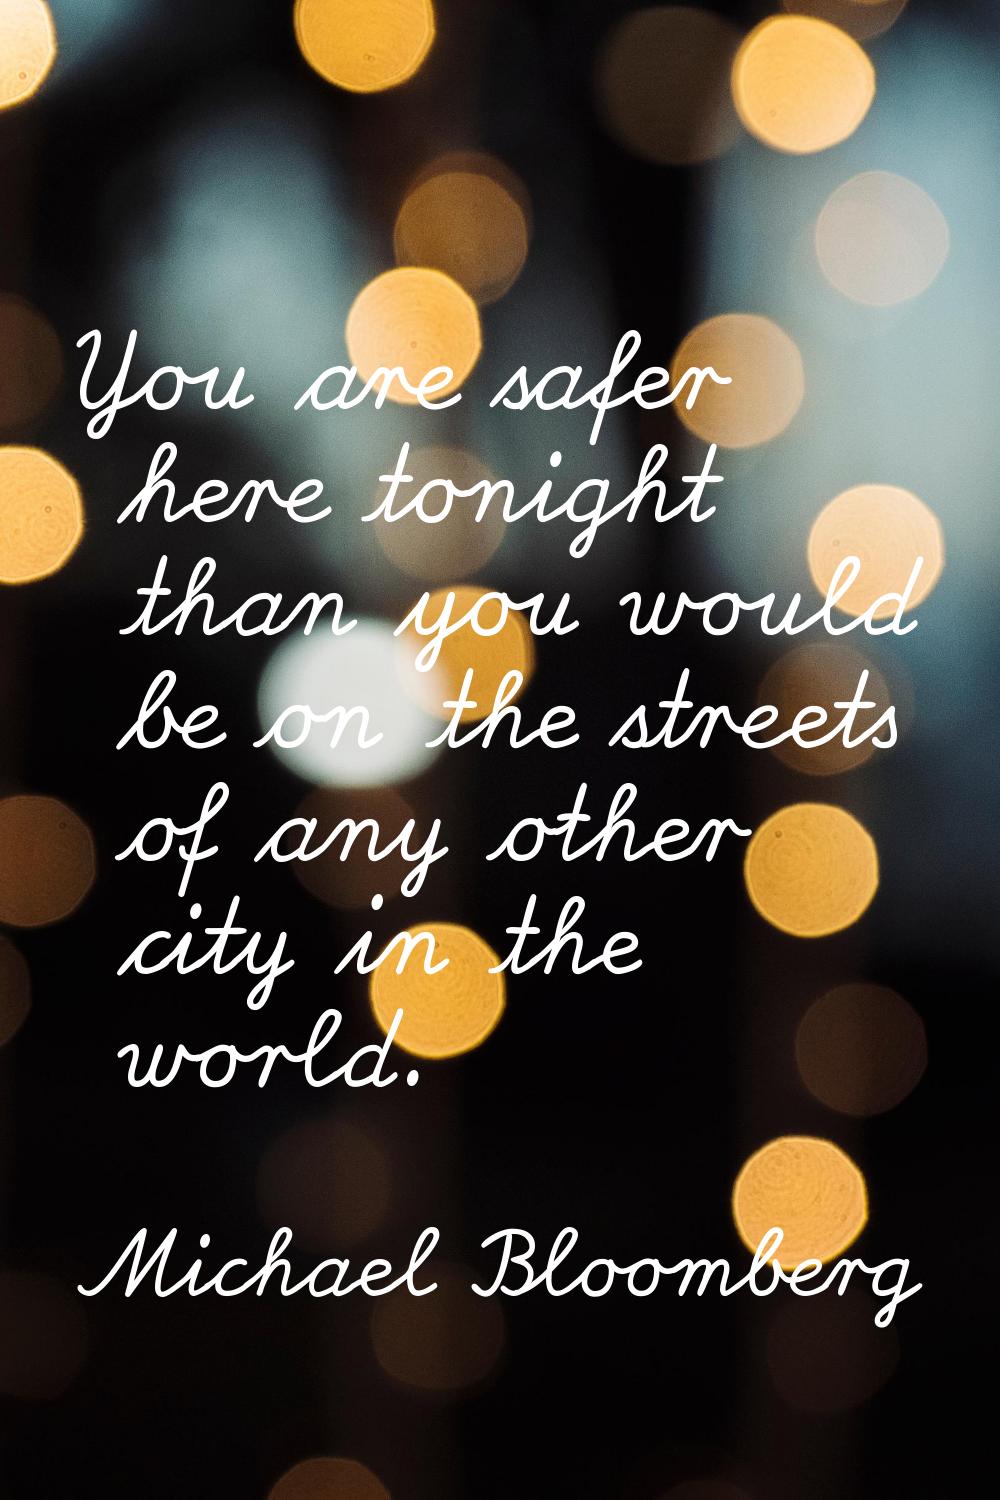 You are safer here tonight than you would be on the streets of any other city in the world.